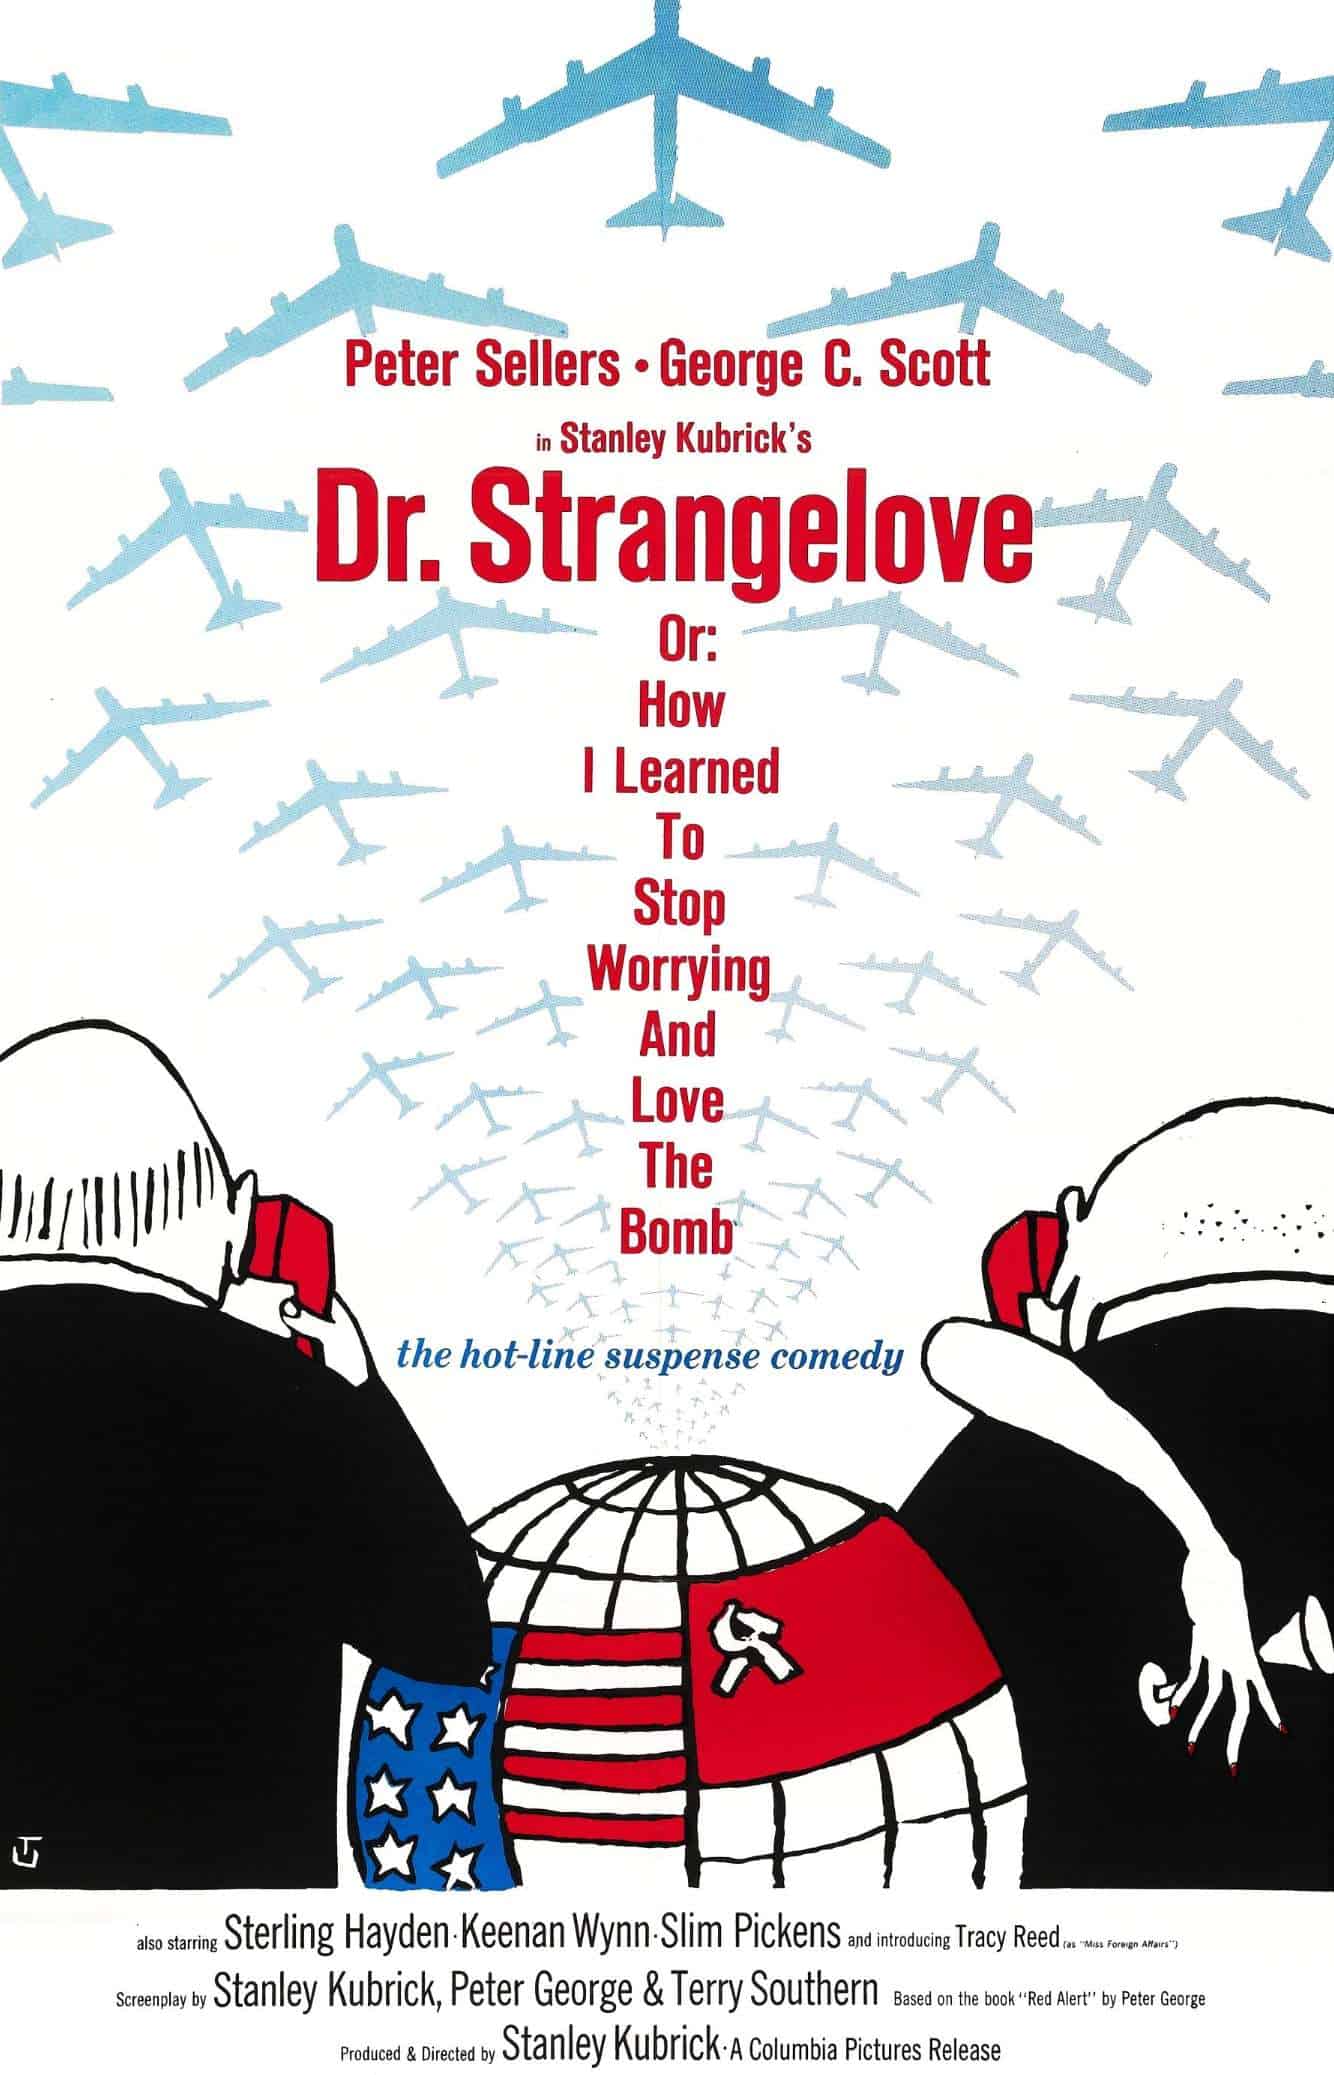 Dr. Strangelove or How I Learned to Stop Worrying and Love the Bomb (1964)